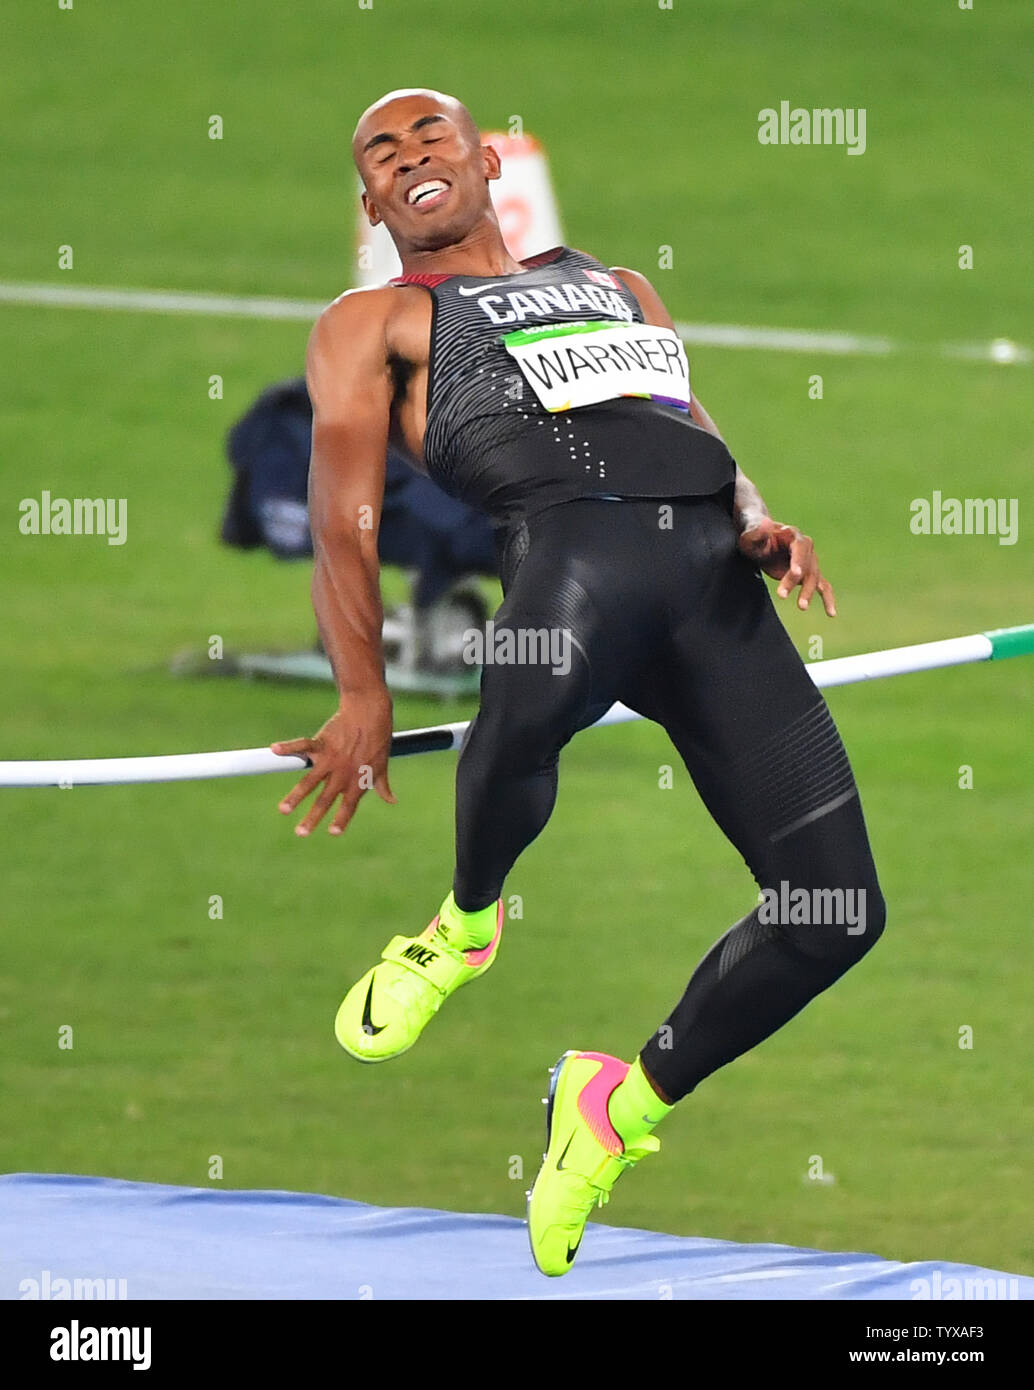 Damian Warner of Canada competes in the Men's High Jump at the Olympic Stadium at the 2016 Rio Summer Olympics in Rio de Janeiro, Brazil, on August 17, 2016.        Photo by Kevin Dietsch/UPI Stock Photo